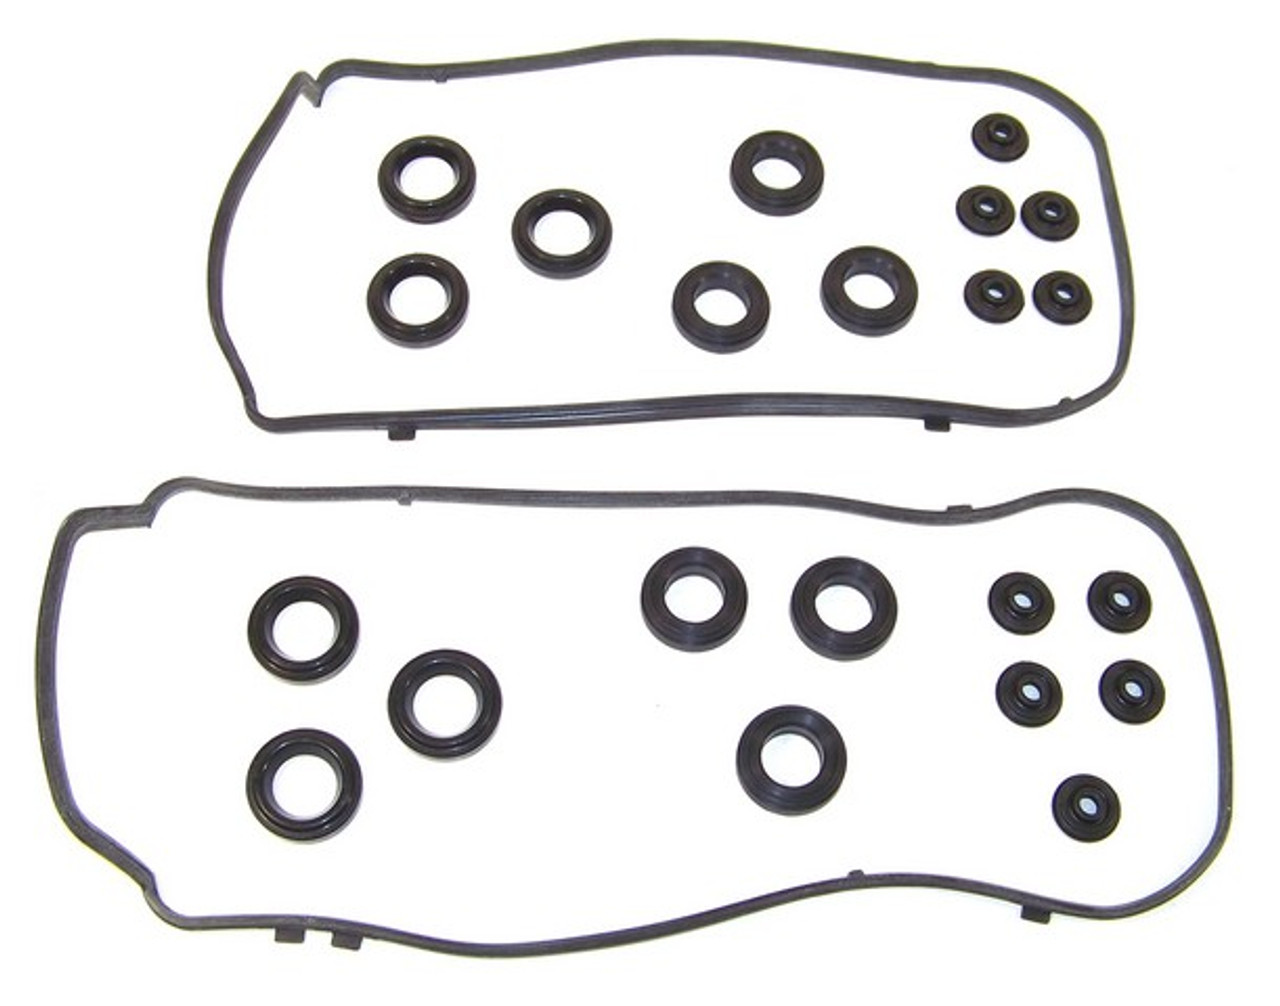 Valve Cover Gasket Set 3.5L 2013 Acura TL - VC268G.22